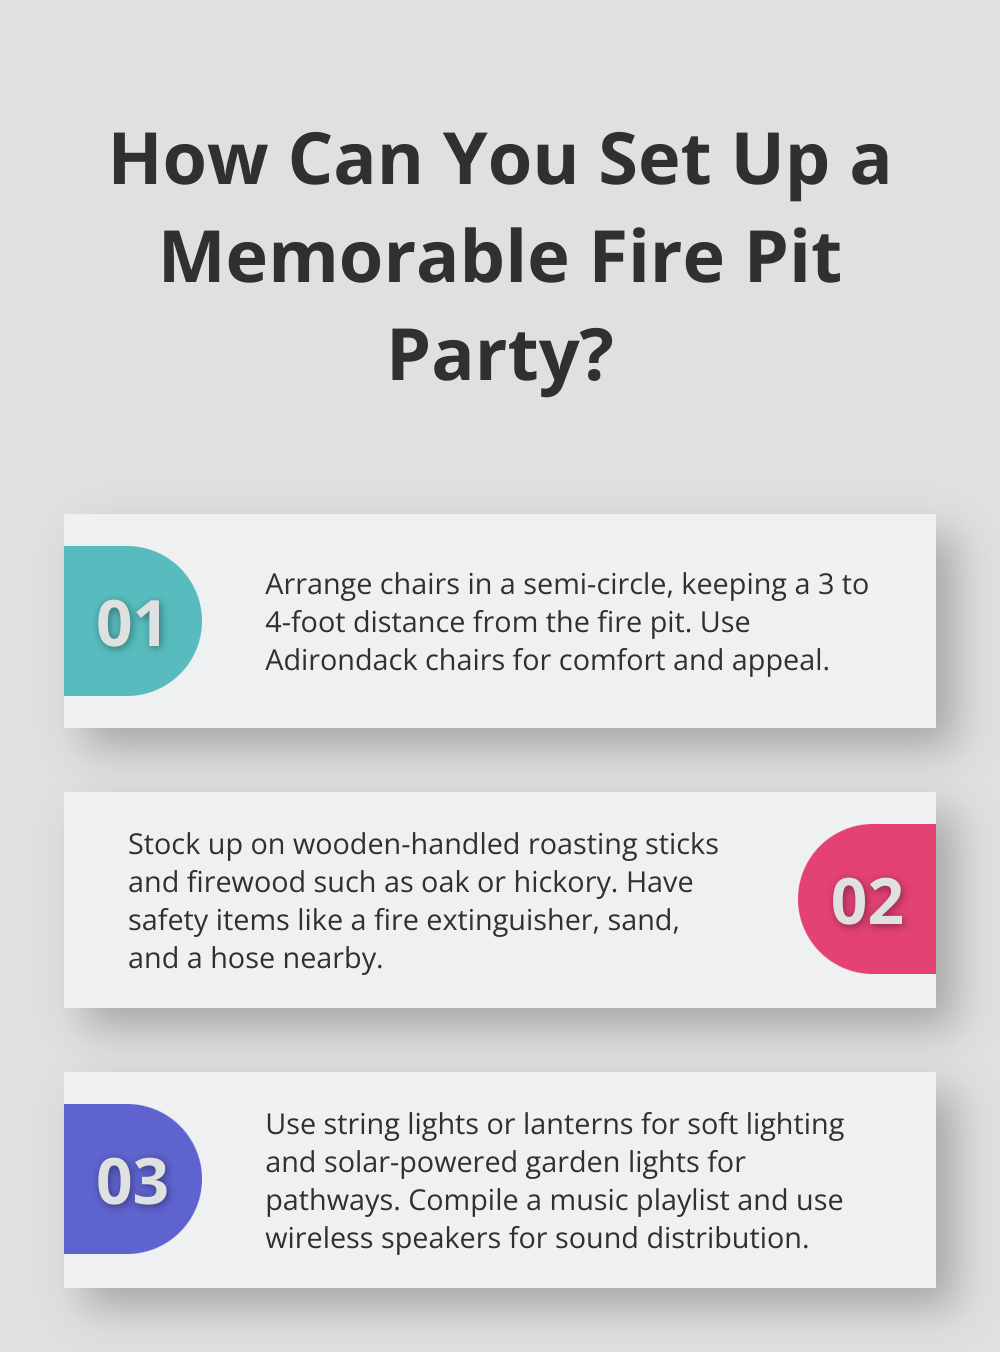 Fact - How Can You Set Up a Memorable Fire Pit Party?